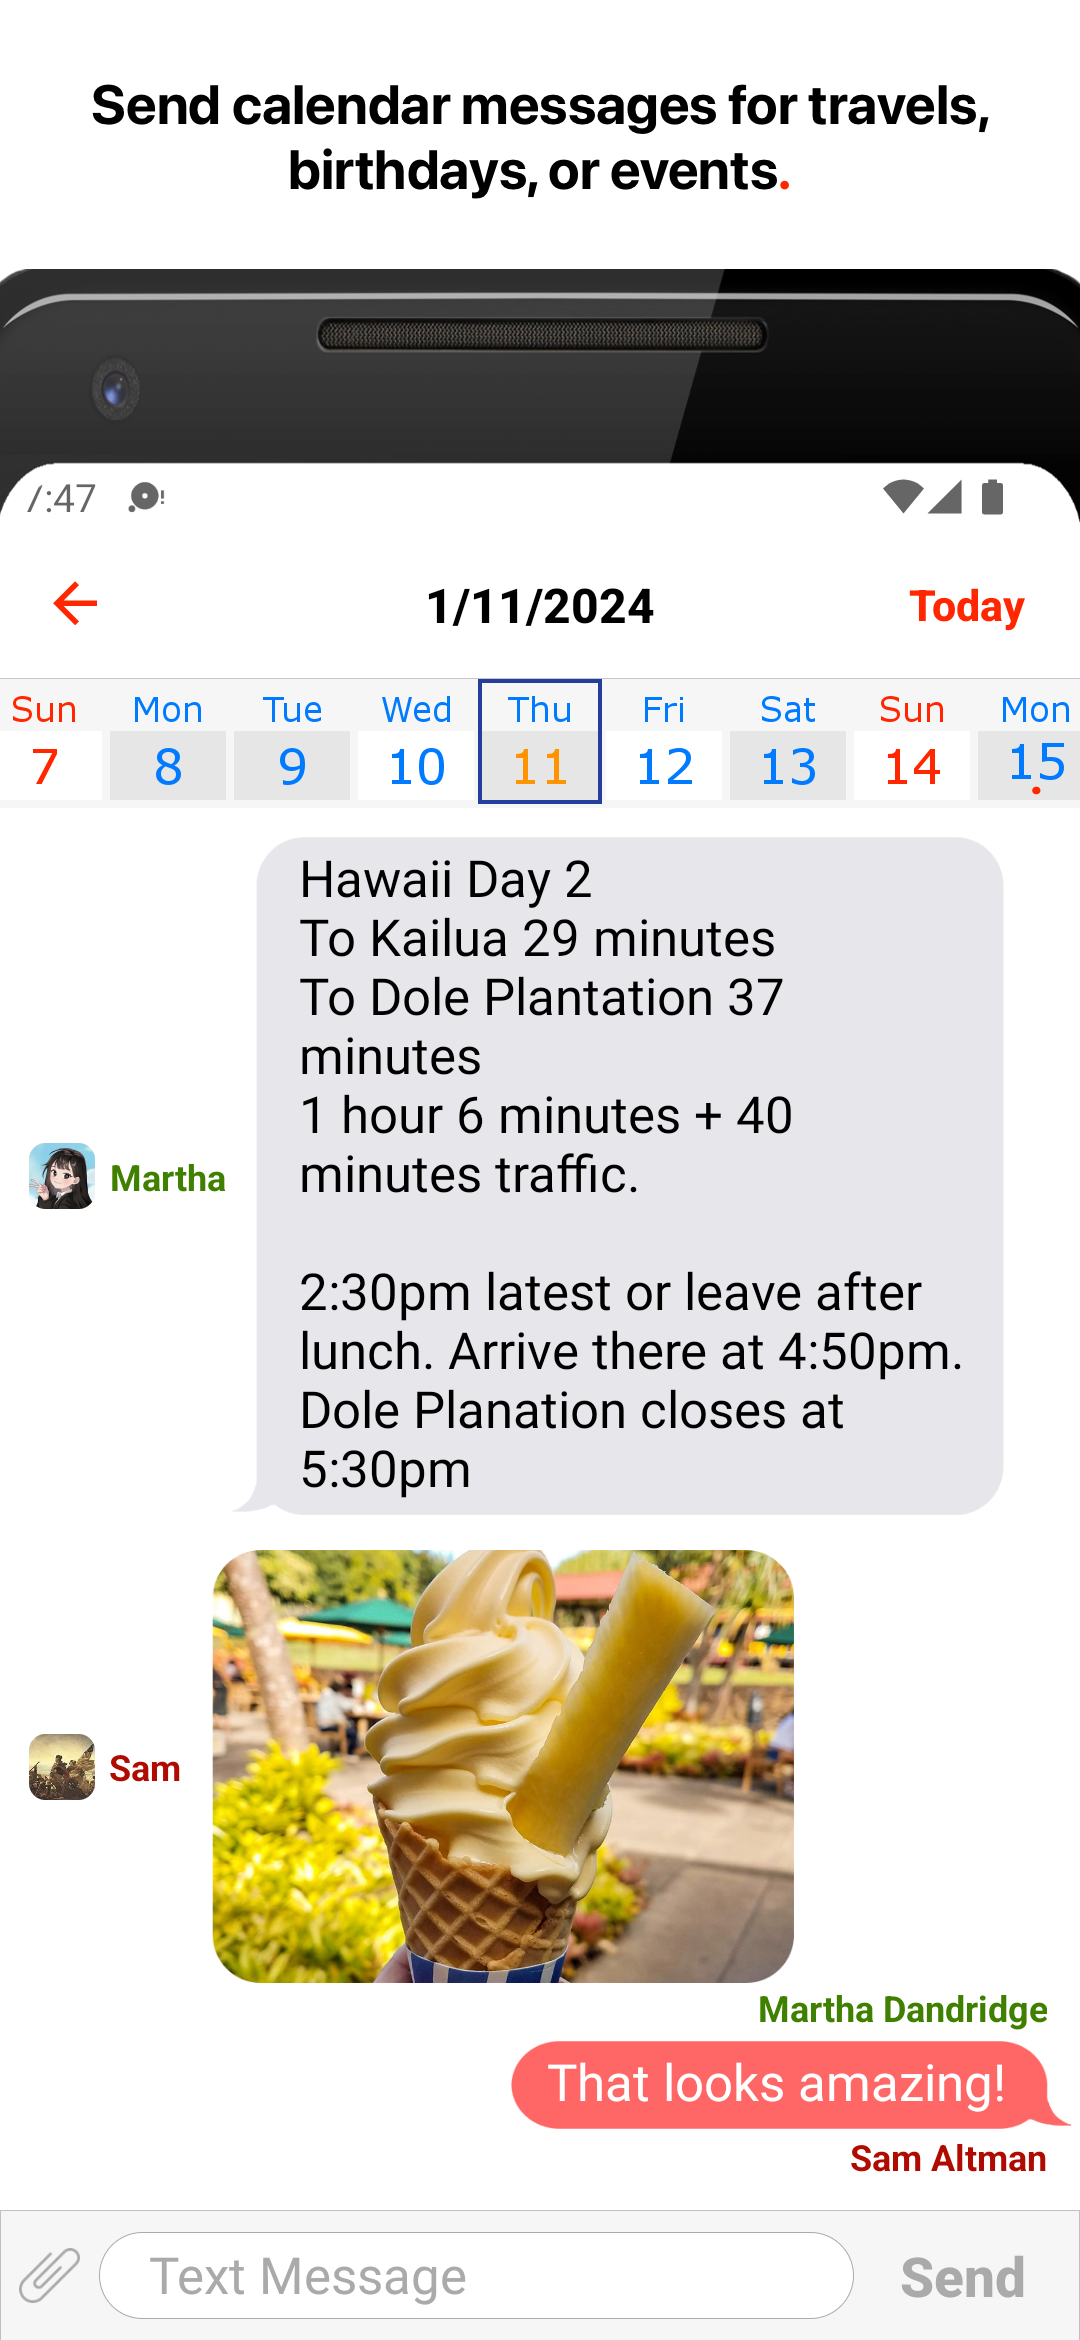 Send calendar messages for travels, birthdays, or events.